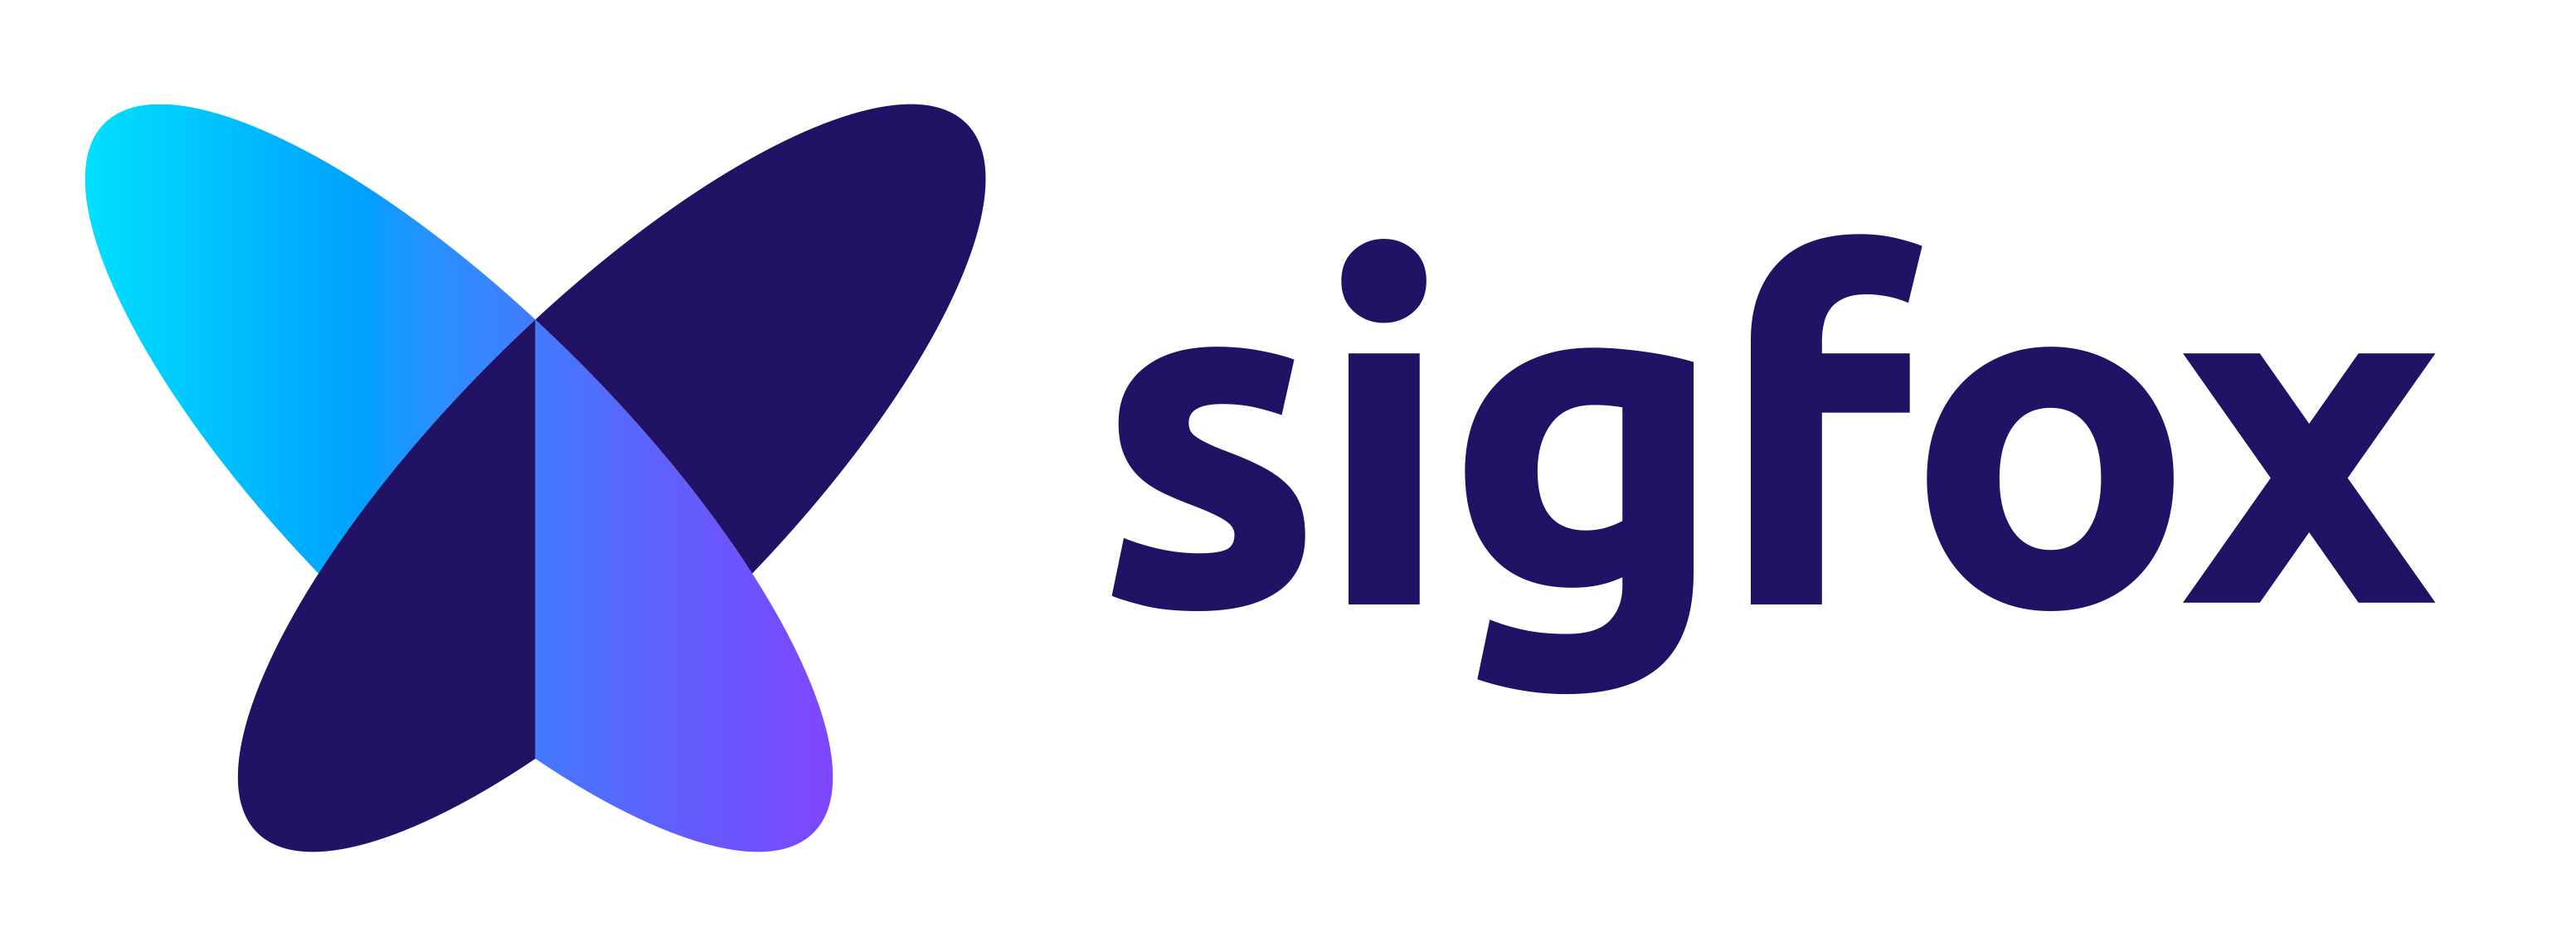 Sigfox Opens New Office in Dallas to Serve as North America Hub for U.S. Network Deployment